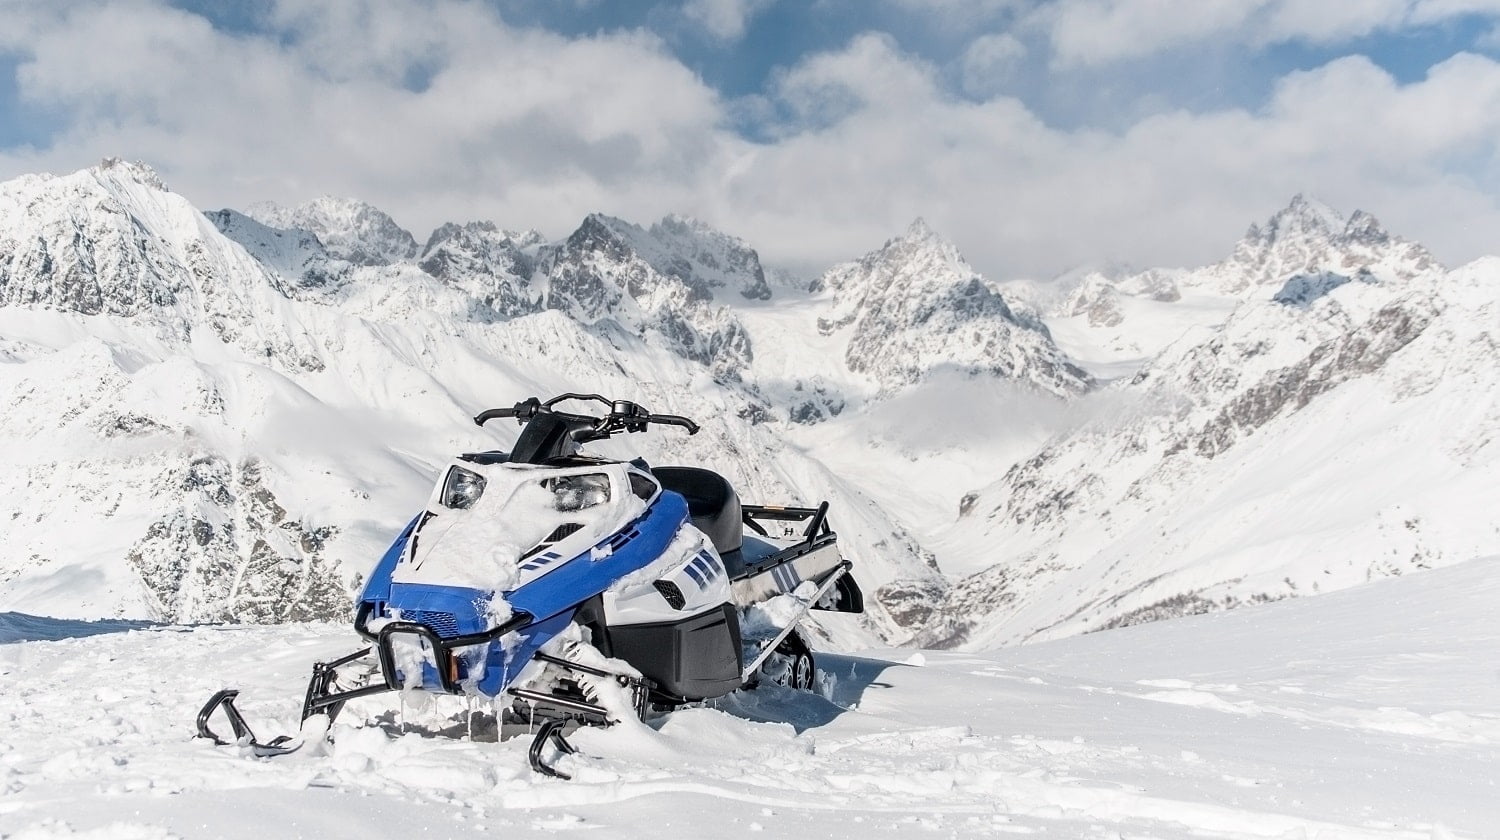 Modern blue snowmobile against the scenic background of high snow mountains peaks and cloudy sky